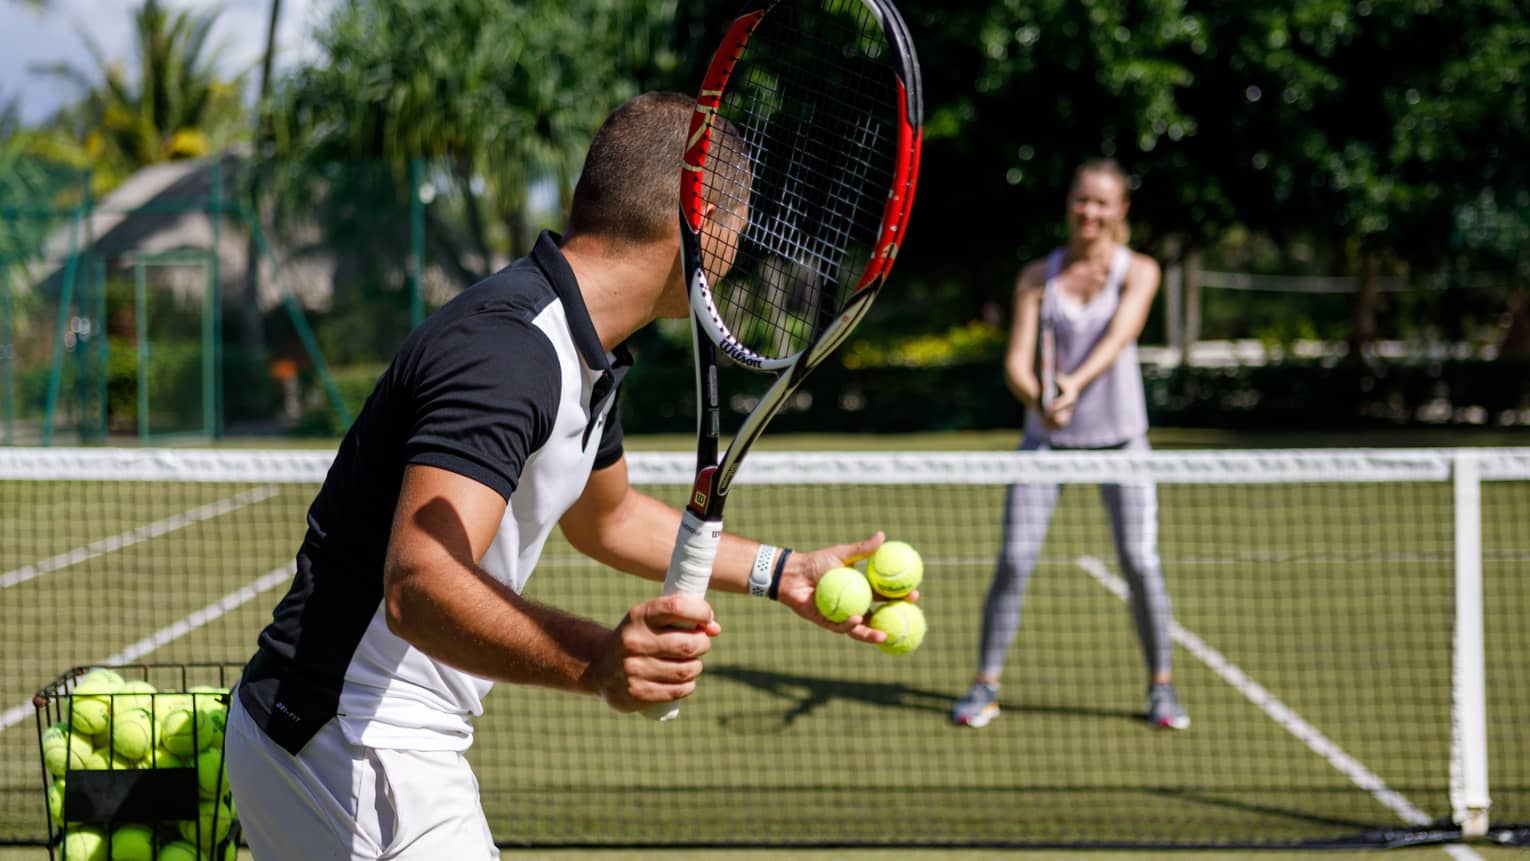 Couple playing tennis on court, man prepares to serve tennis balls to woman ready to swing